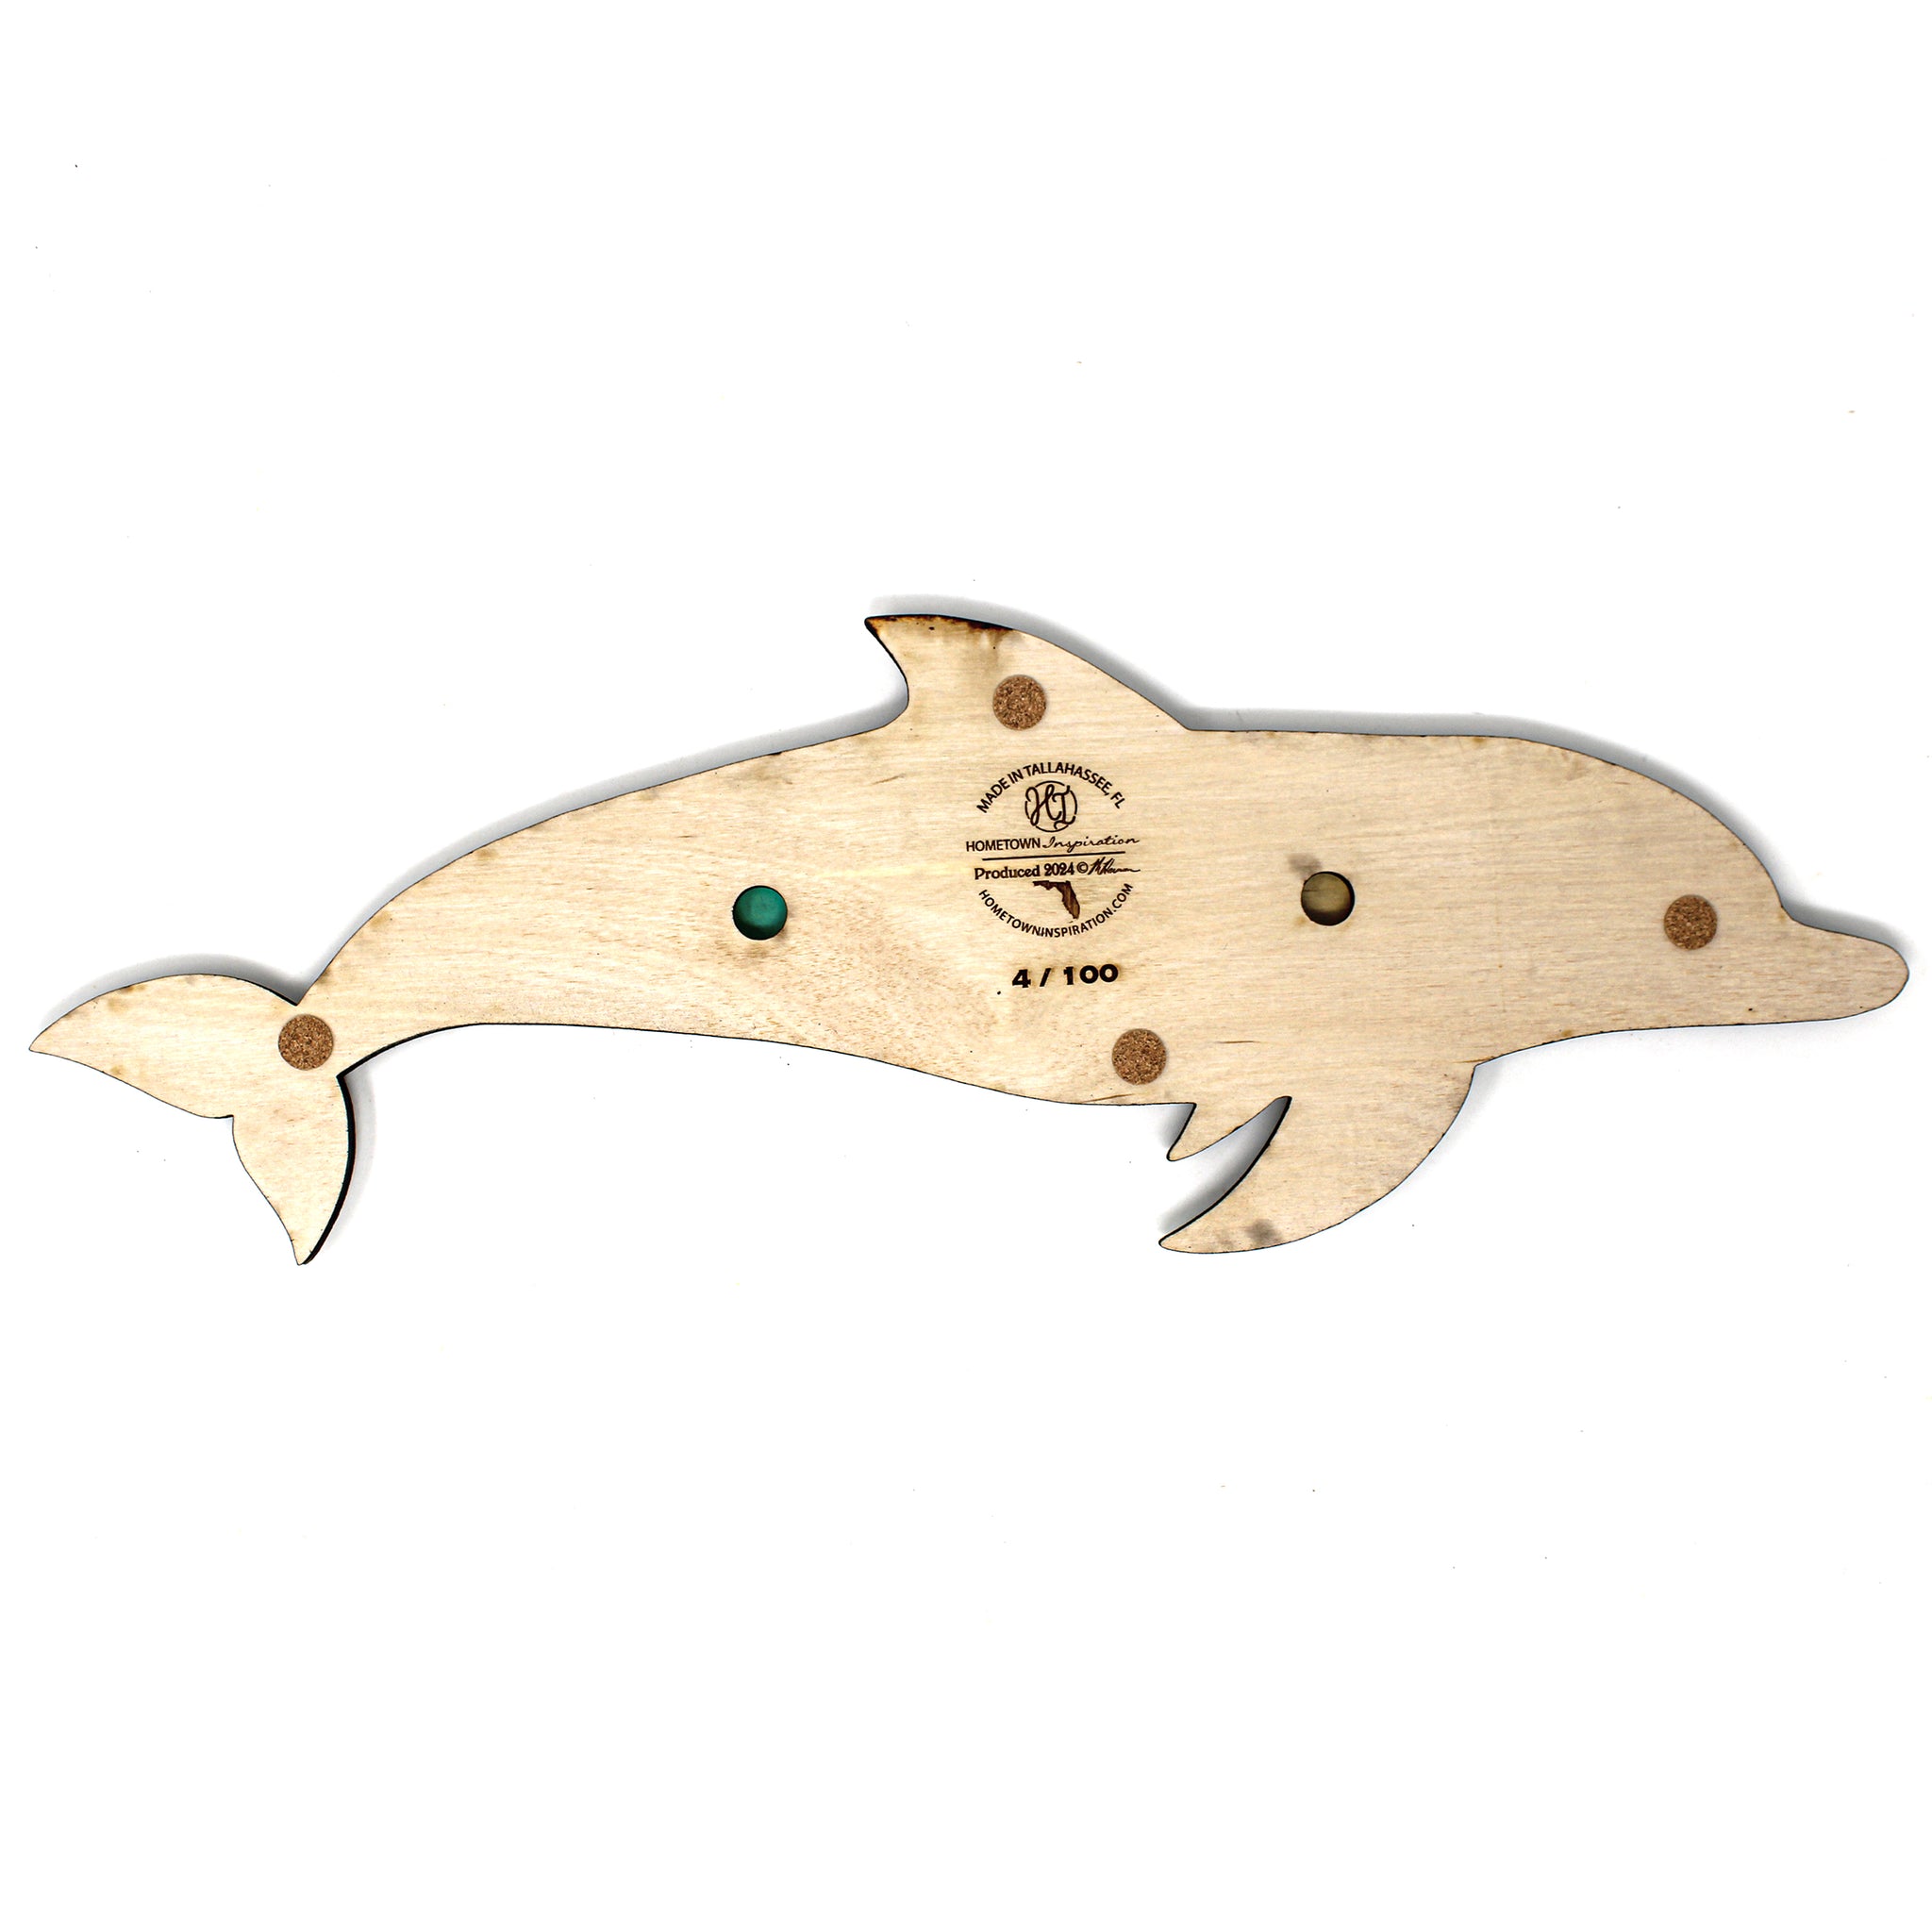 Wall Art - Limited Edition Wood Mosaic - Dolphin 1